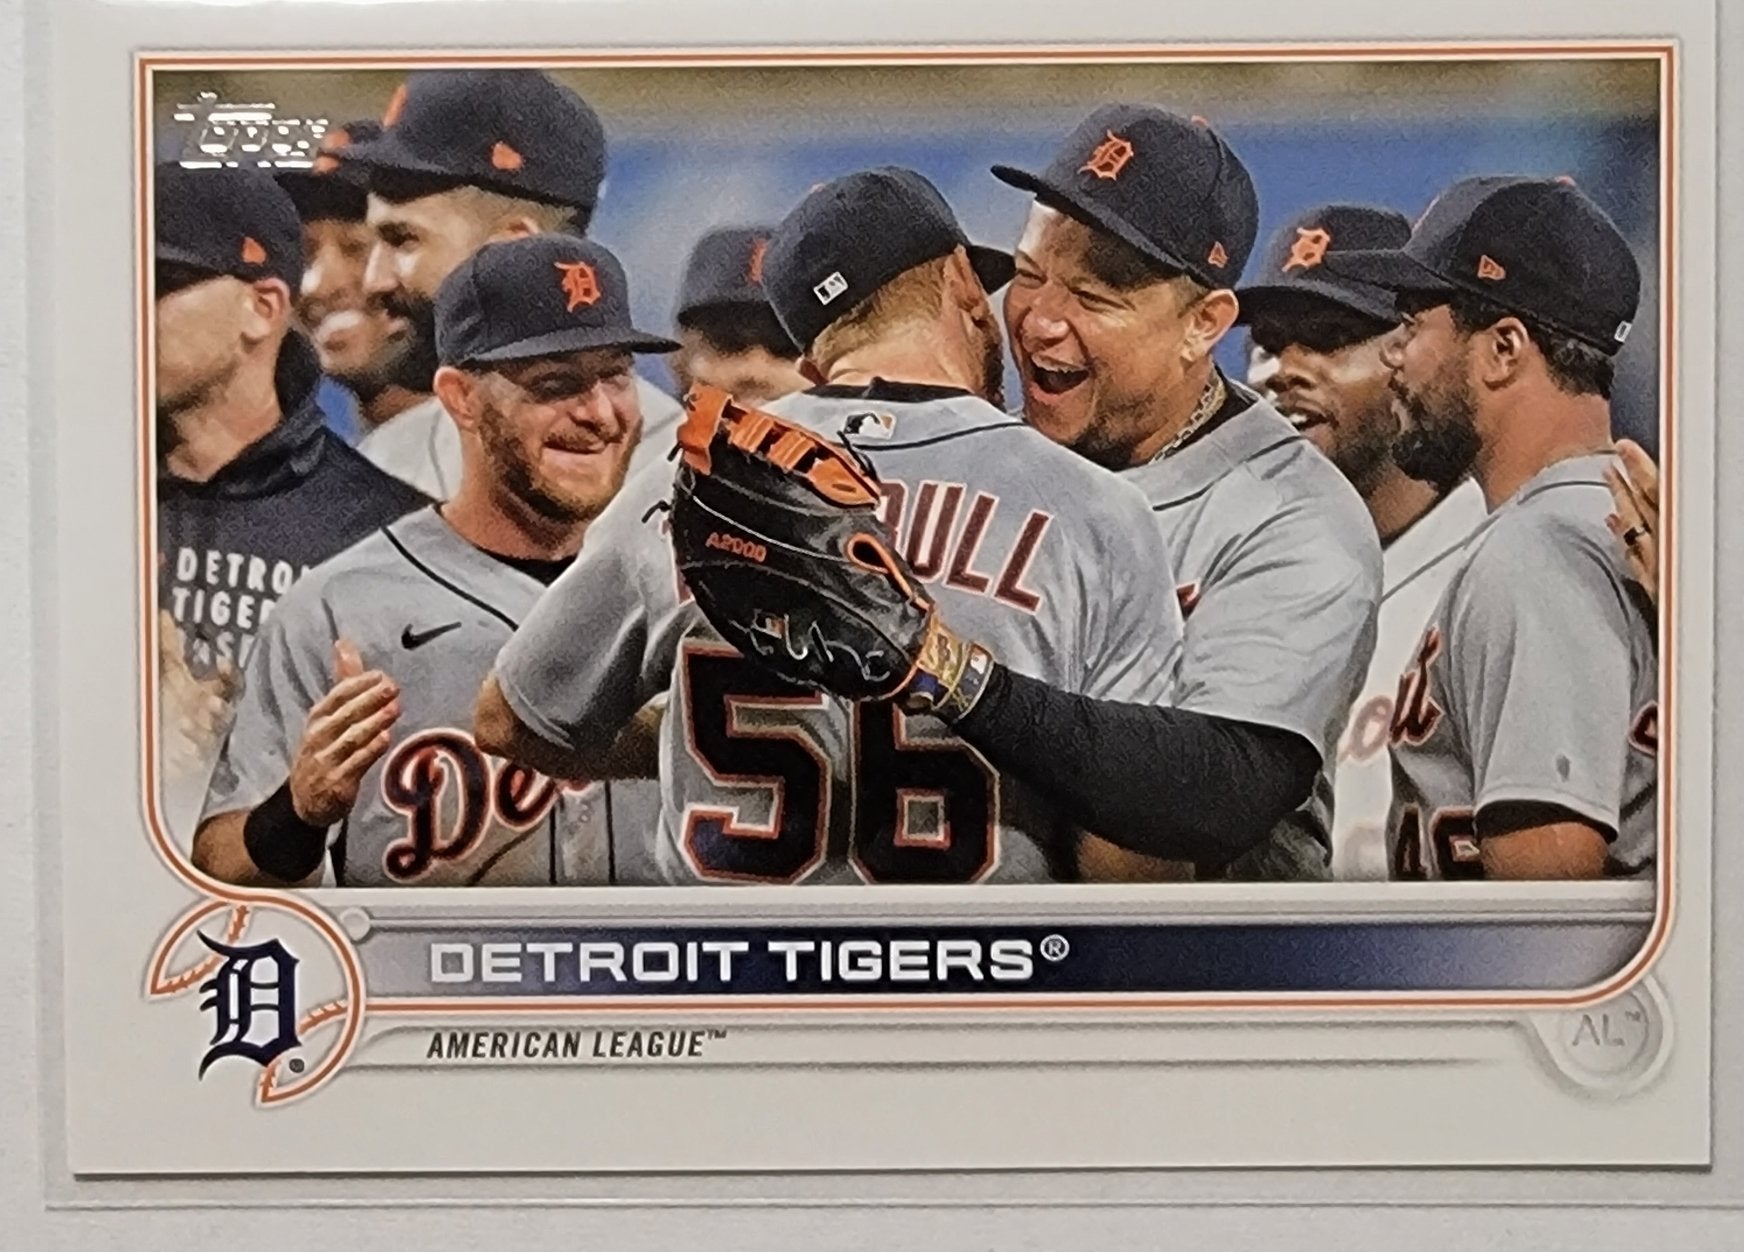 2022 Topps Series 2 Detroit Tigers Team Baseball Card AVM1 simple Xclusive Collectibles   